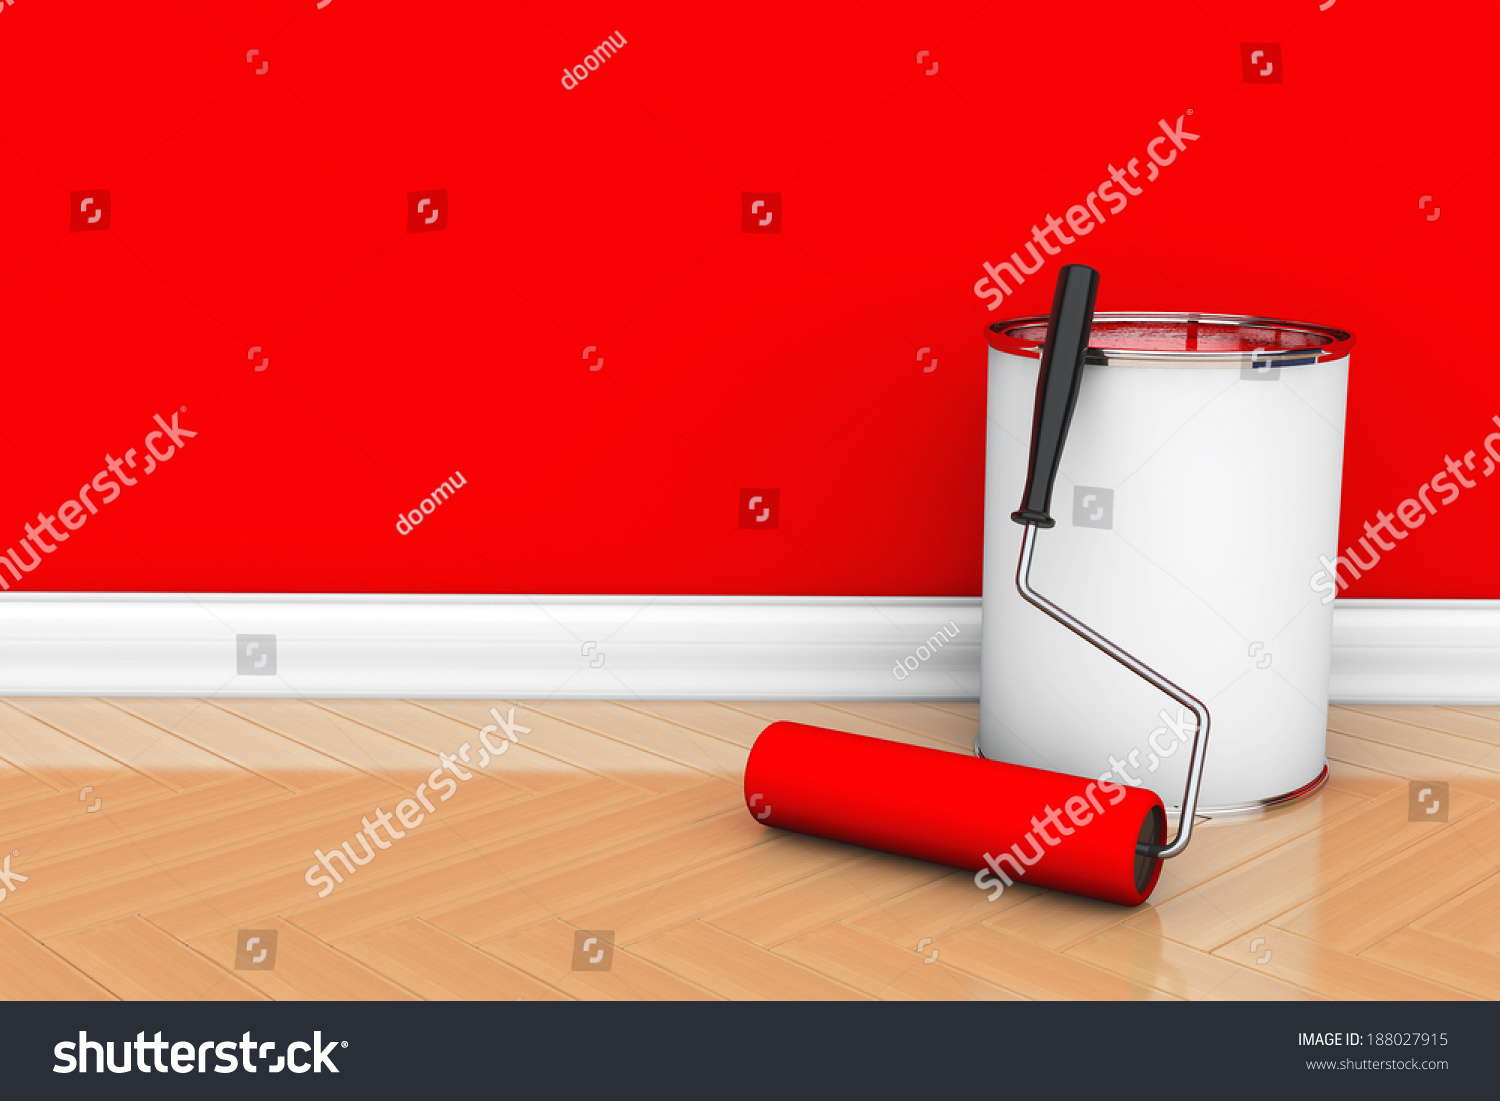 Painting Walls Red Color Paint Can Stock Illustration 188027915